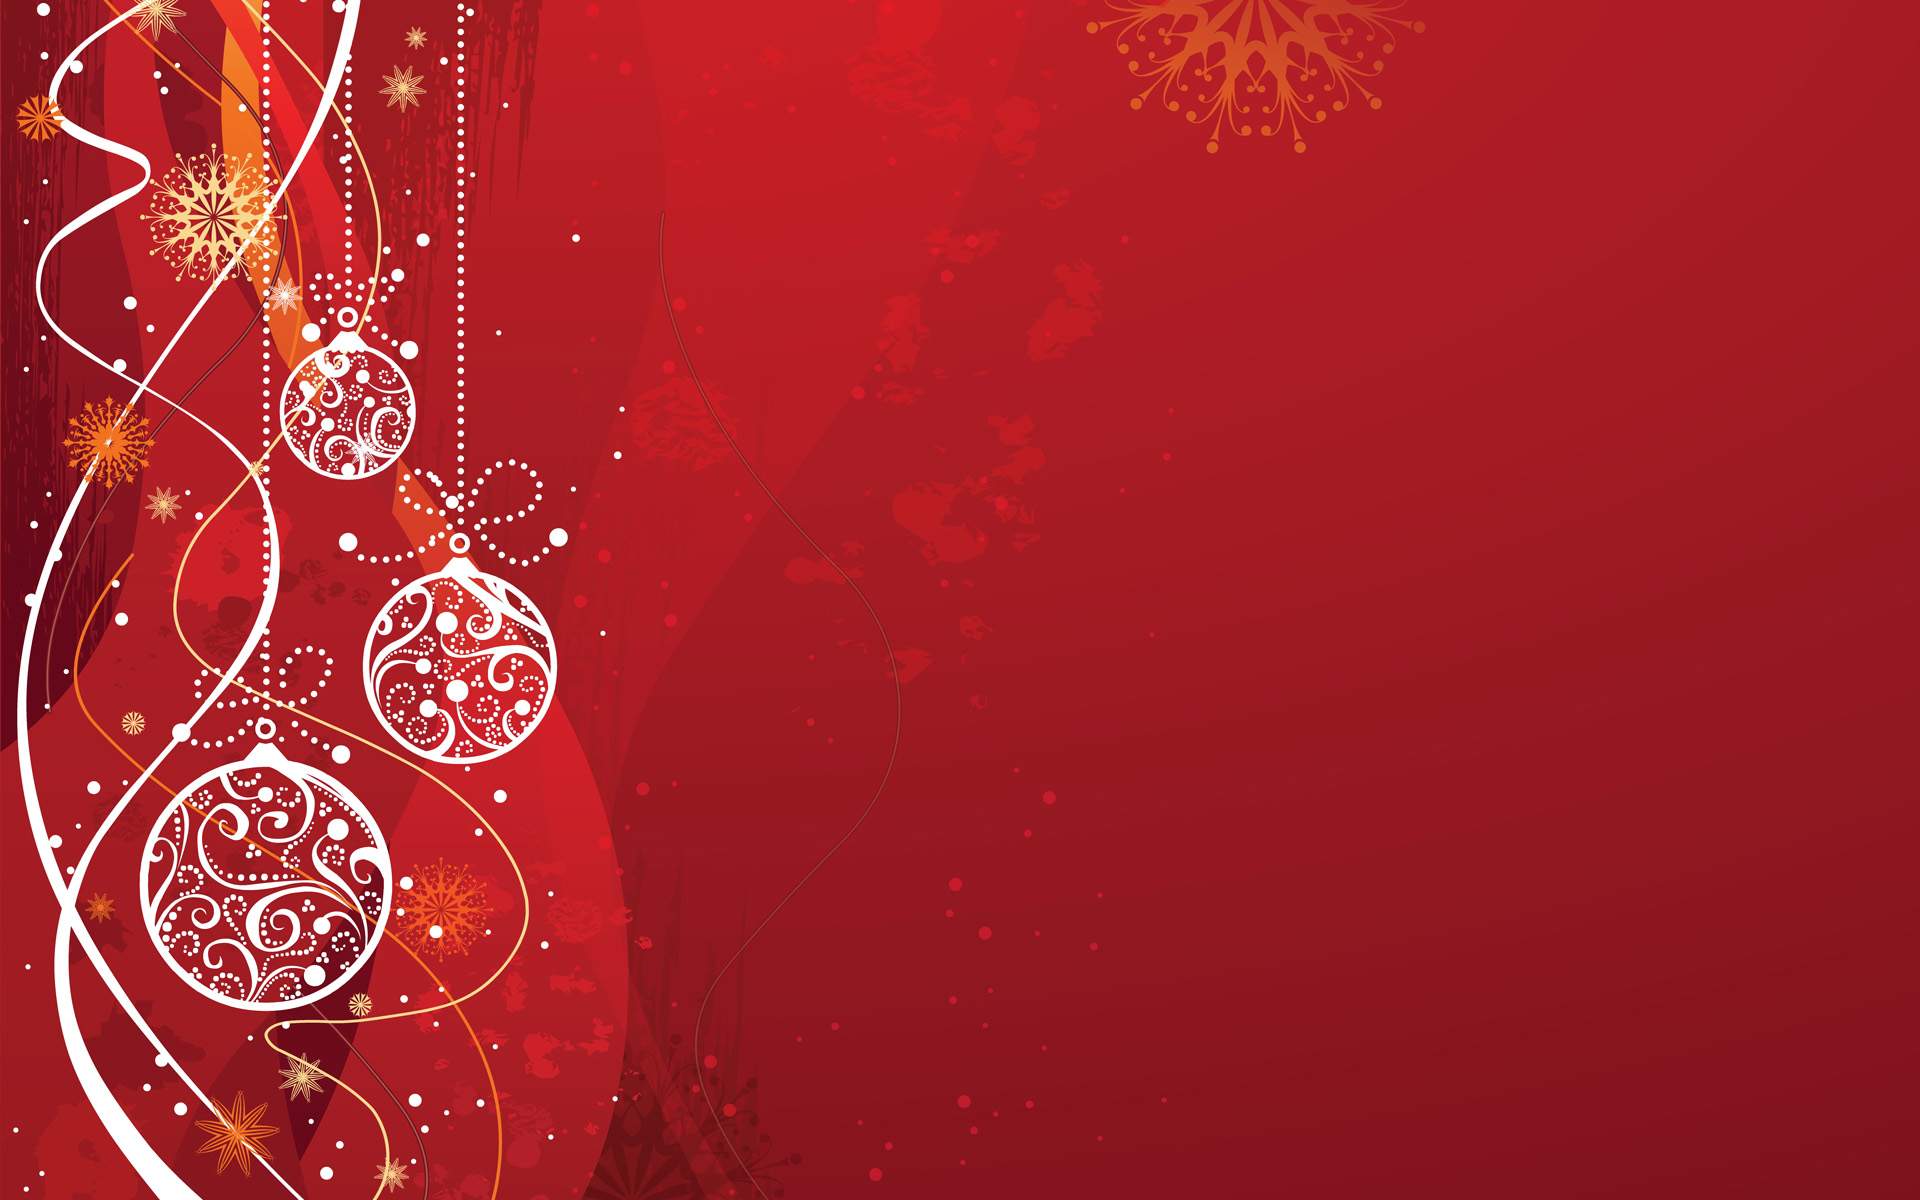 Christmas-Backgrounds-Walpapers-Downloads-free-with-HD.jpg